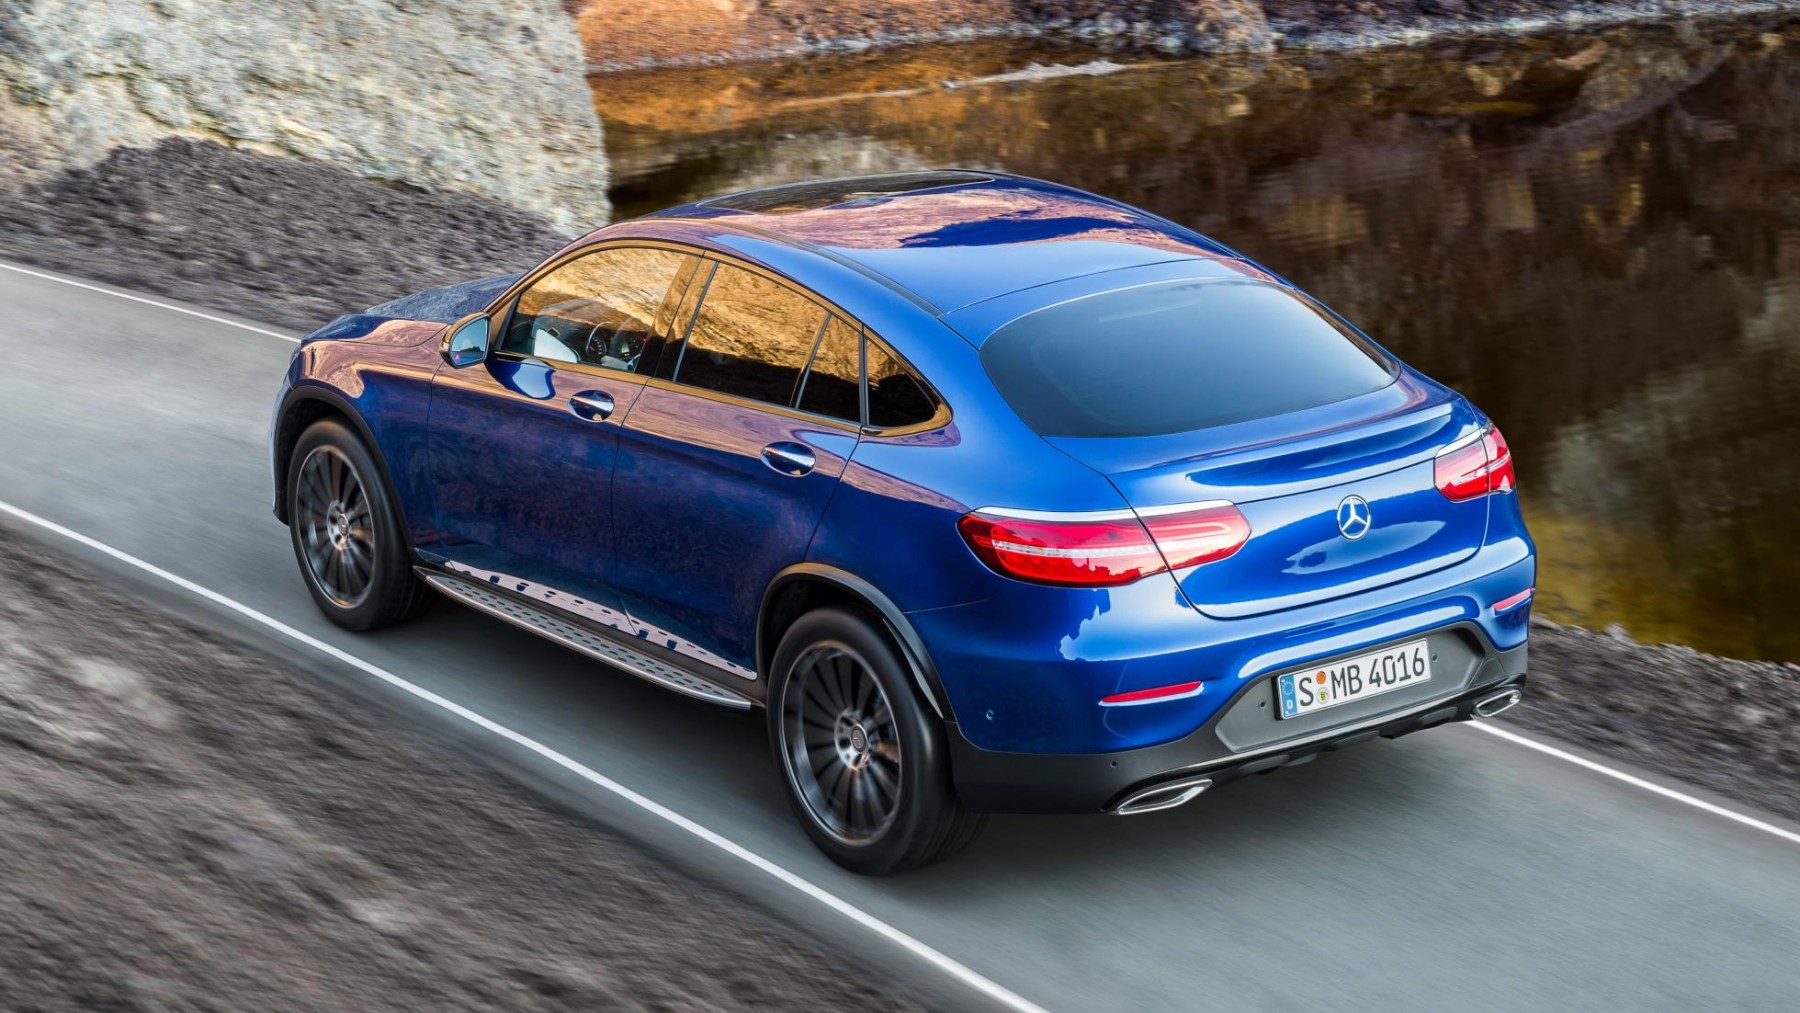 Source: Top Gear The post GLC Coupé (Concept) by Mercedes-Benz ...